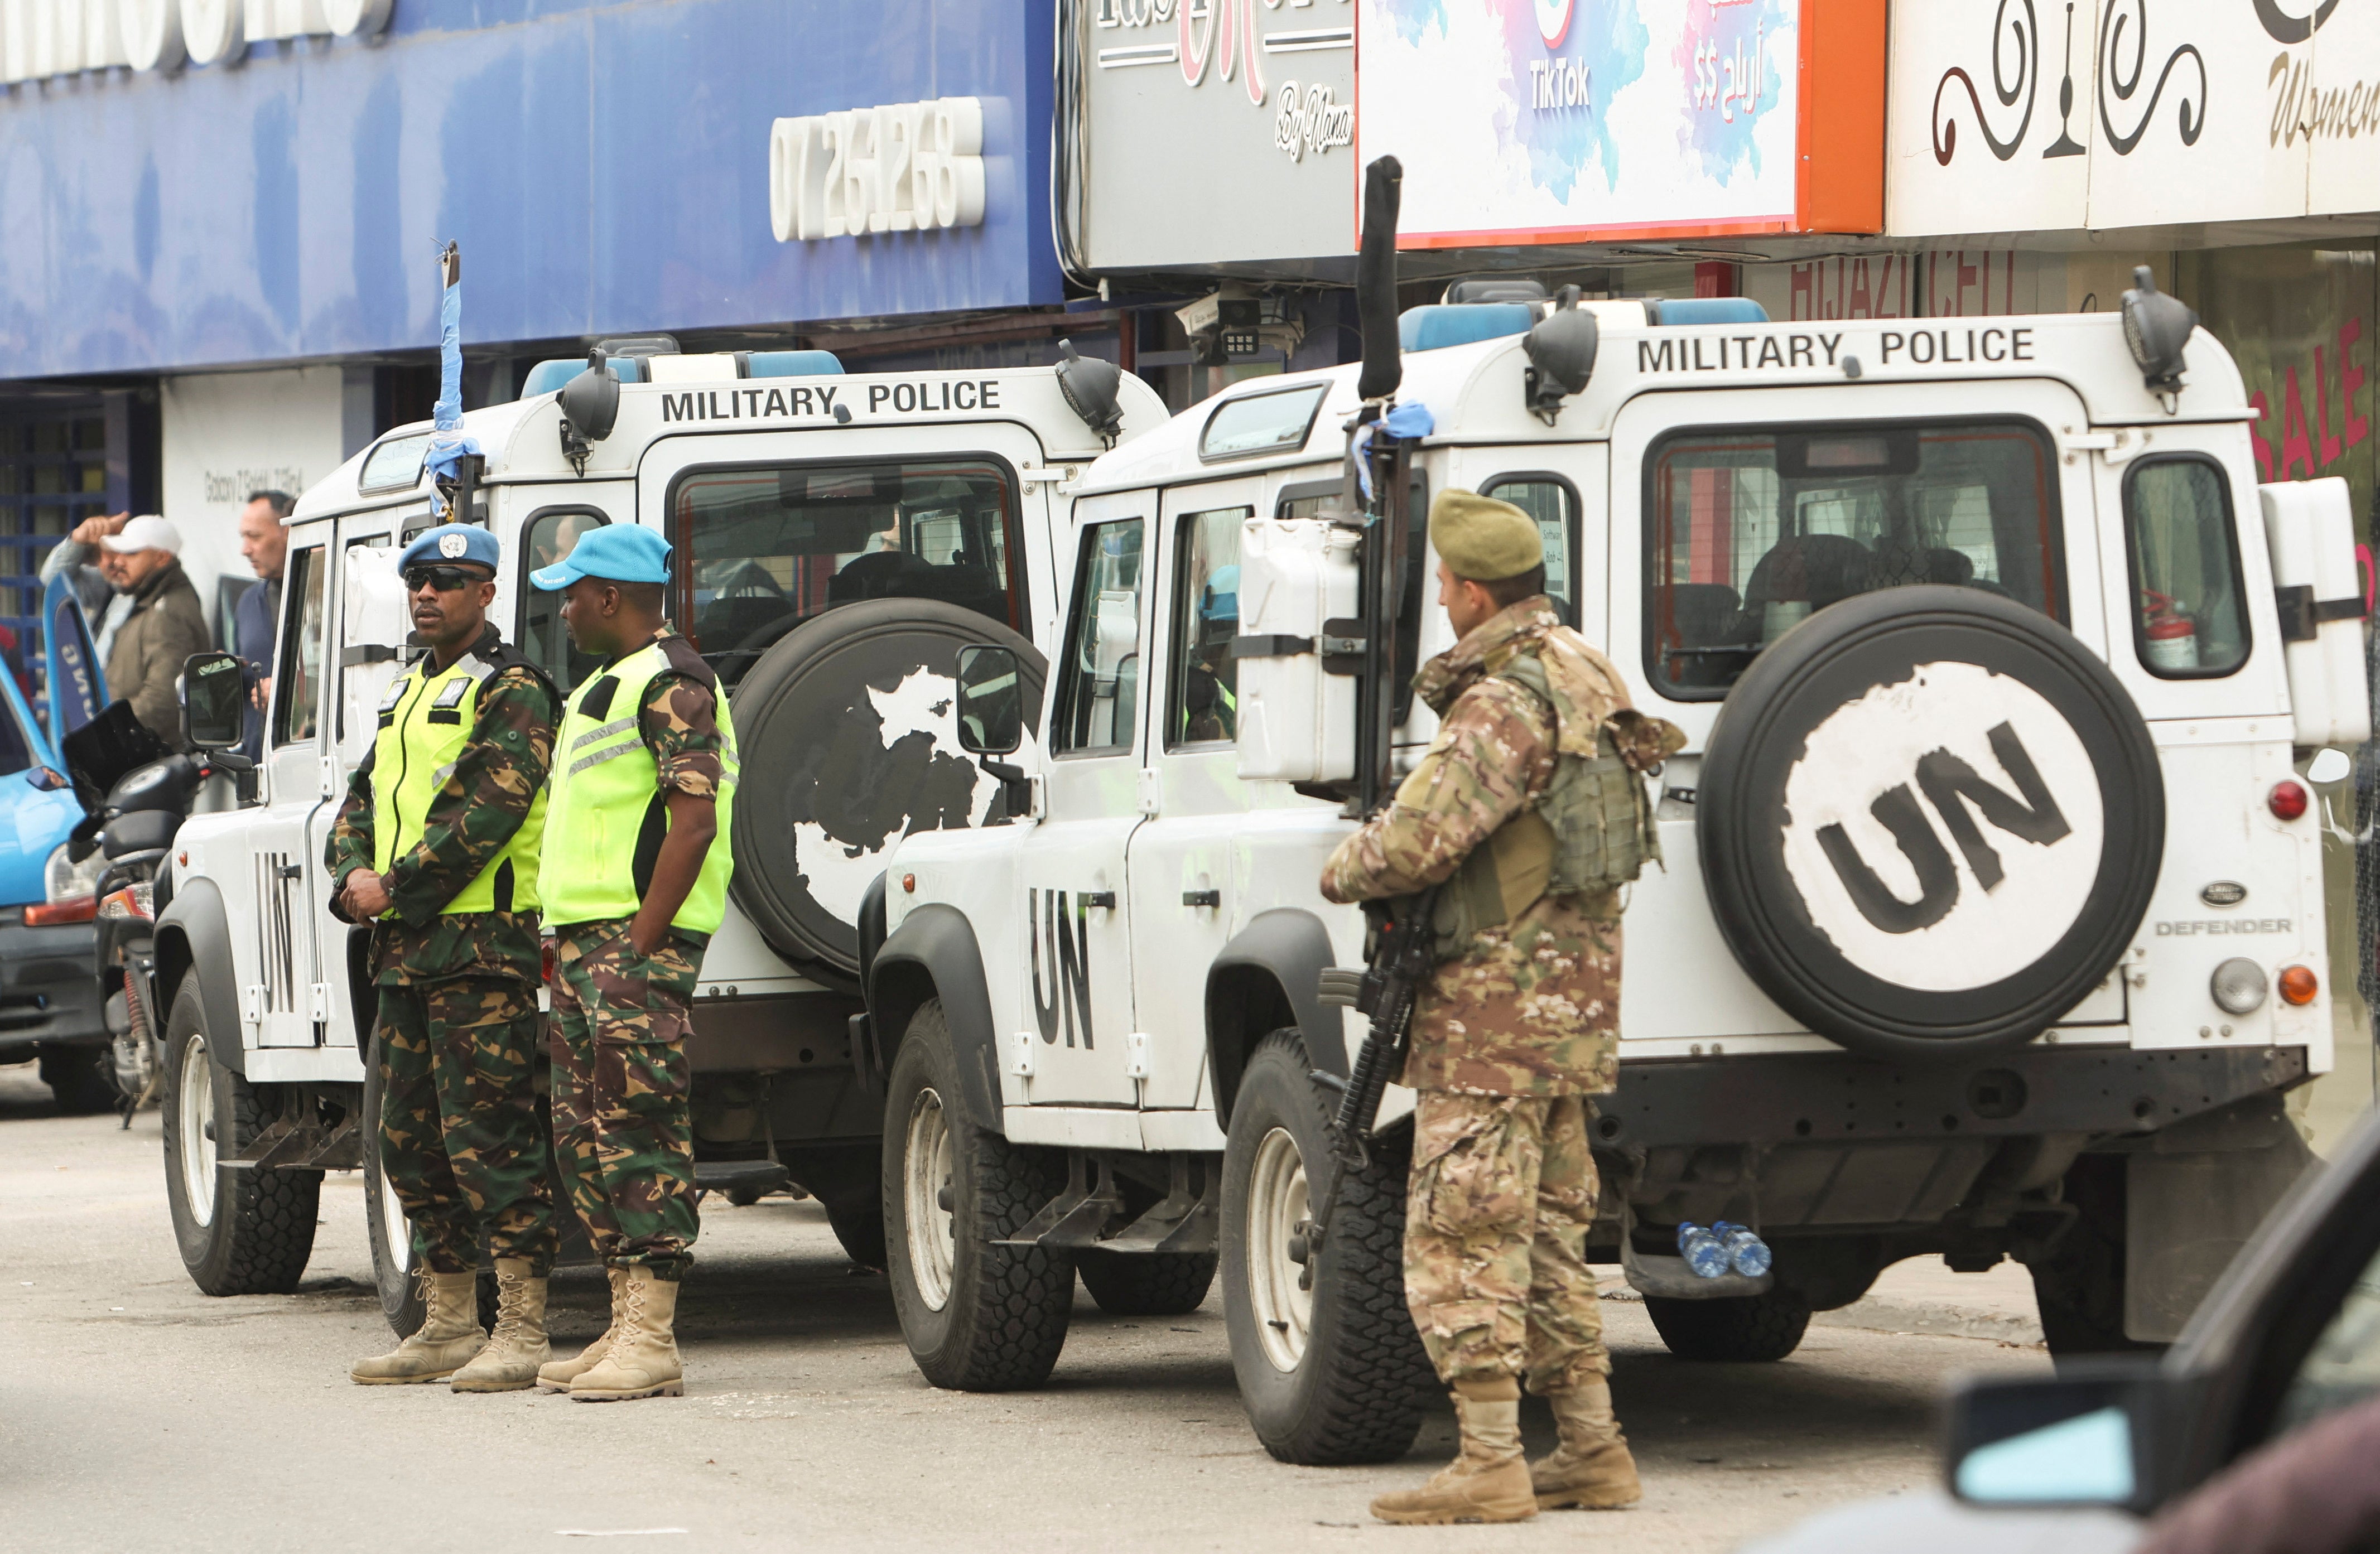 A Lebanese army member and United Nations peacekeepers (UNIFIL) stand next to a UNIFIL vehicles in Al-Aqbieh